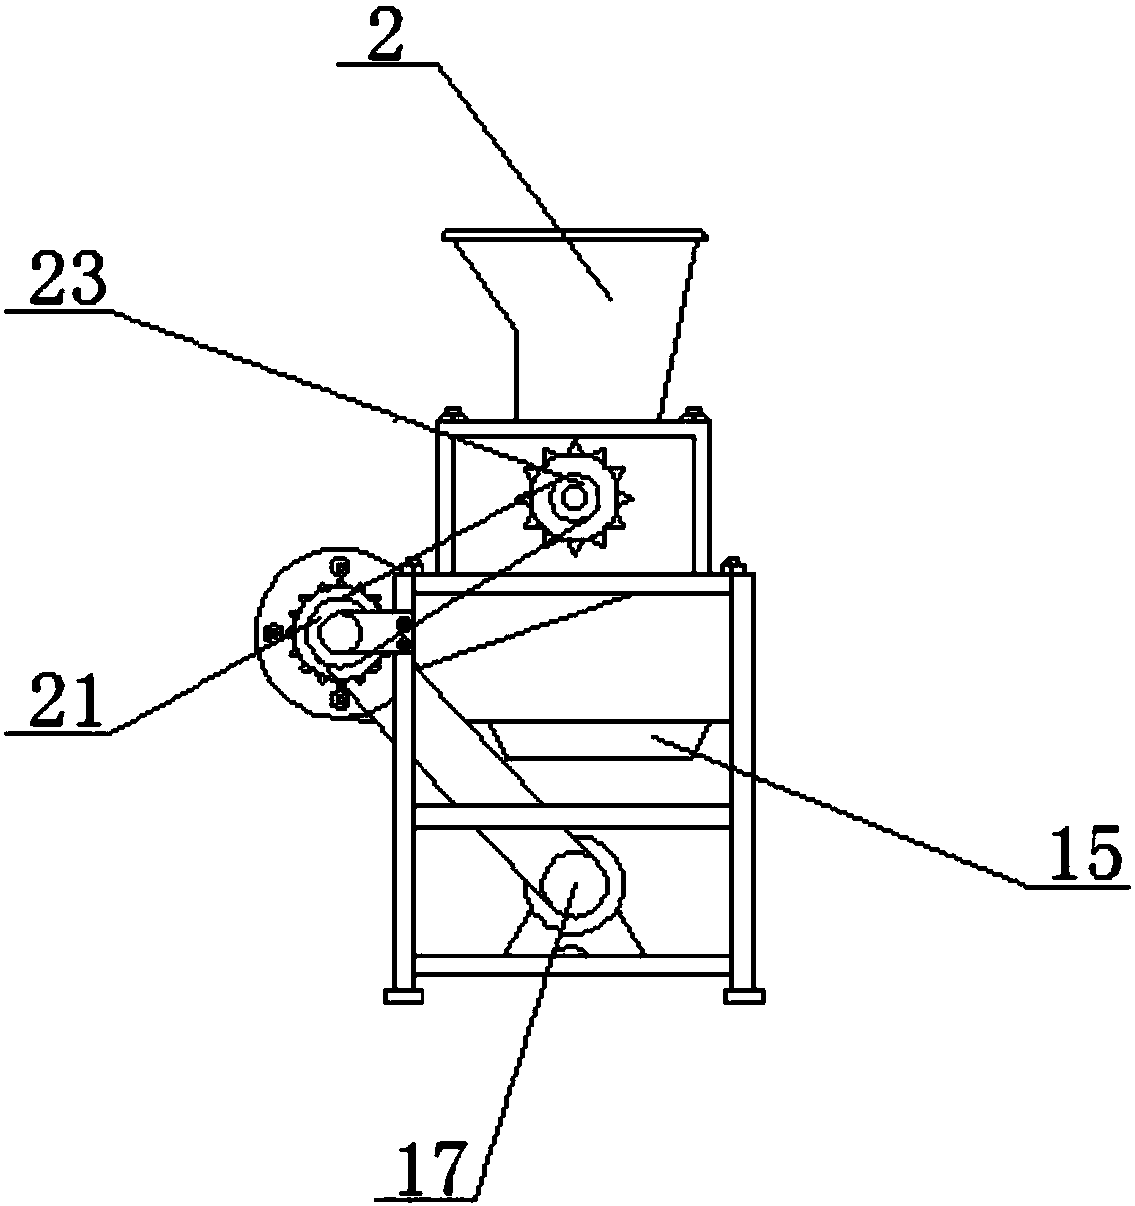 Device for producing high-heat-value biomass fuel from agricultural and forestry waste